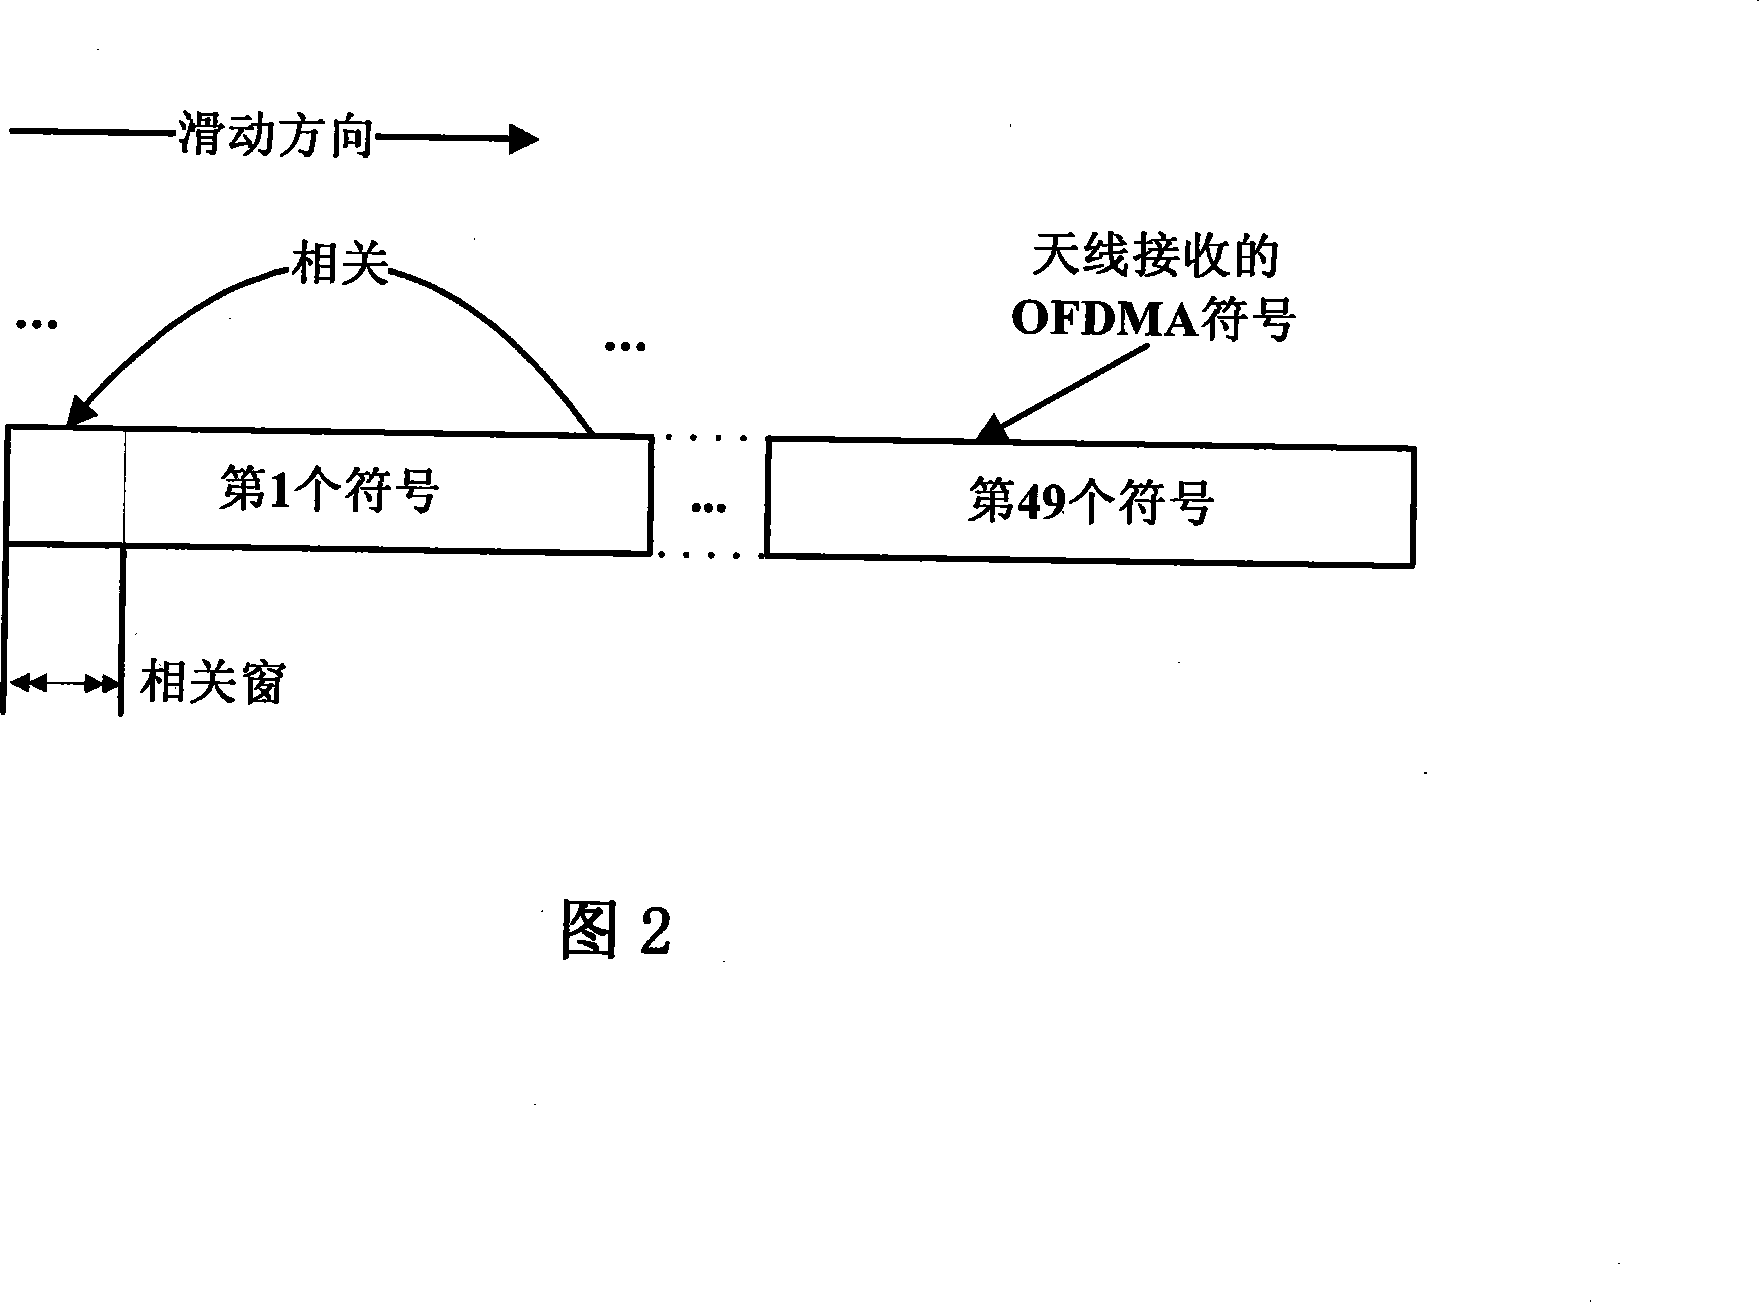 Lead code detecting method of subscriber station receiver